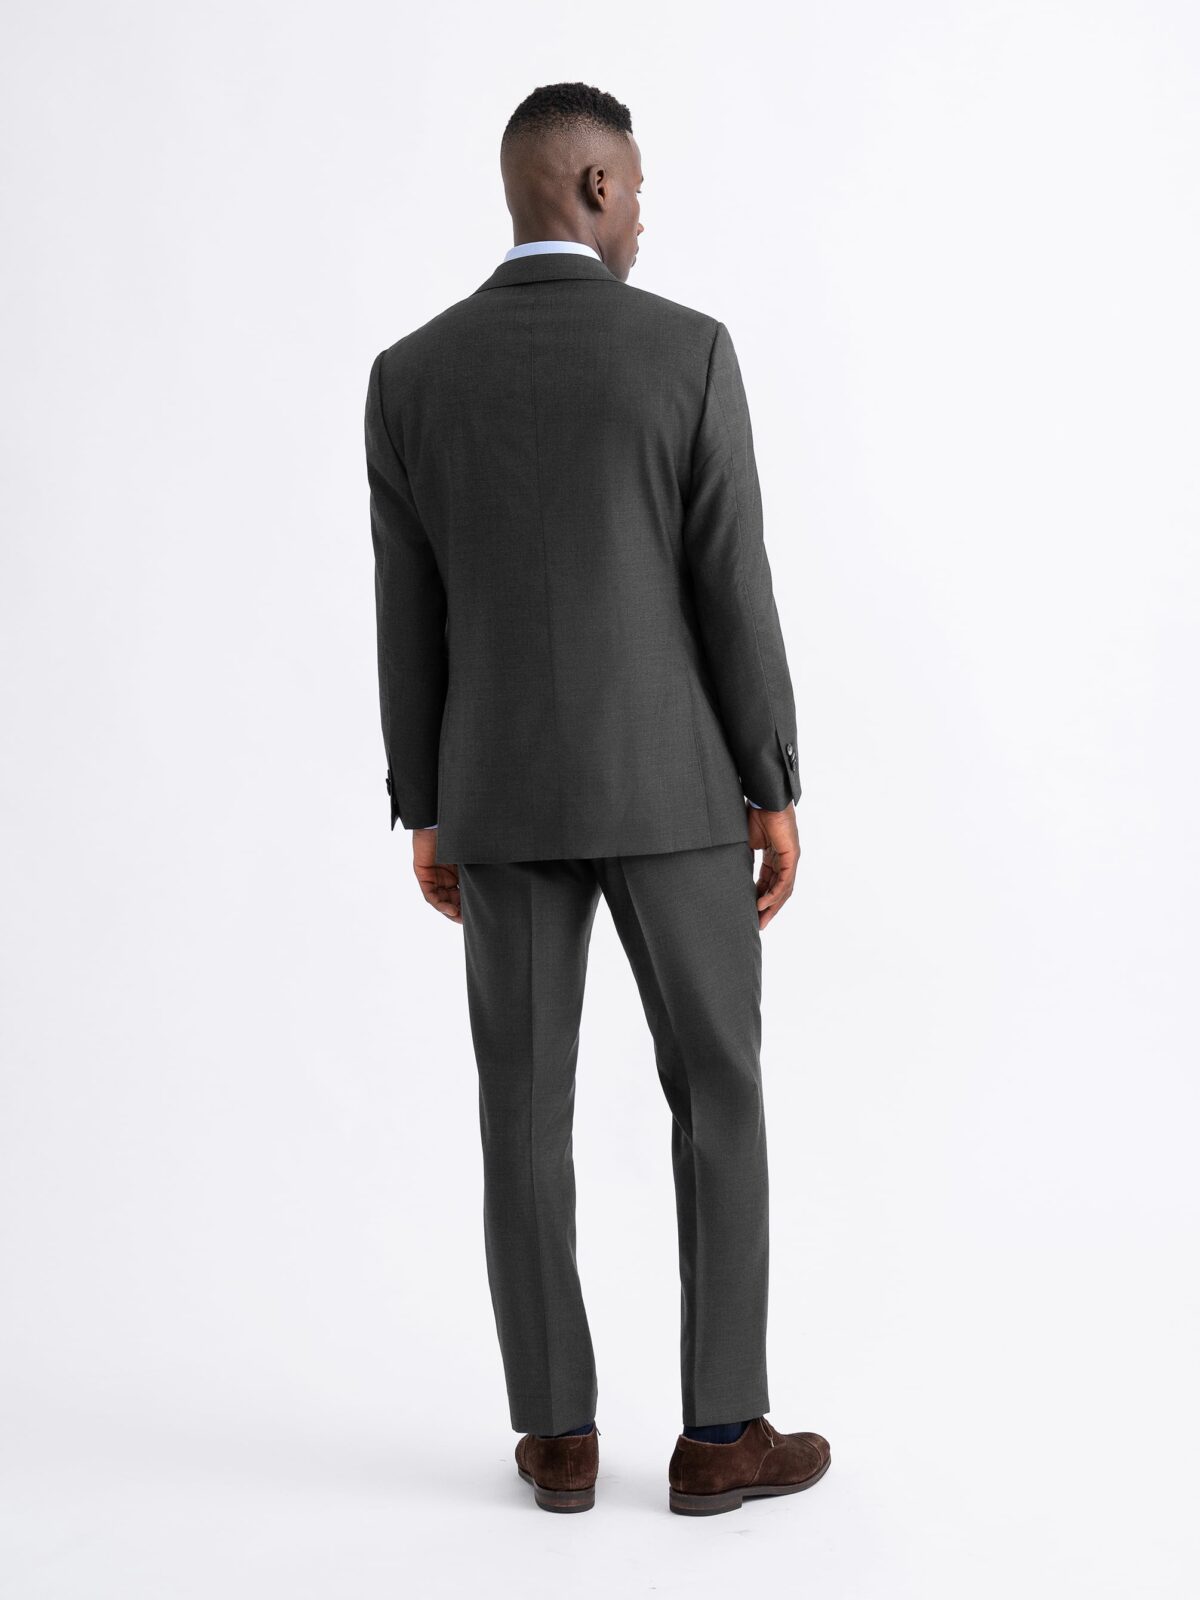 Why Do Some Suit Trousers Have Tabs on the Side? – StudioSuits